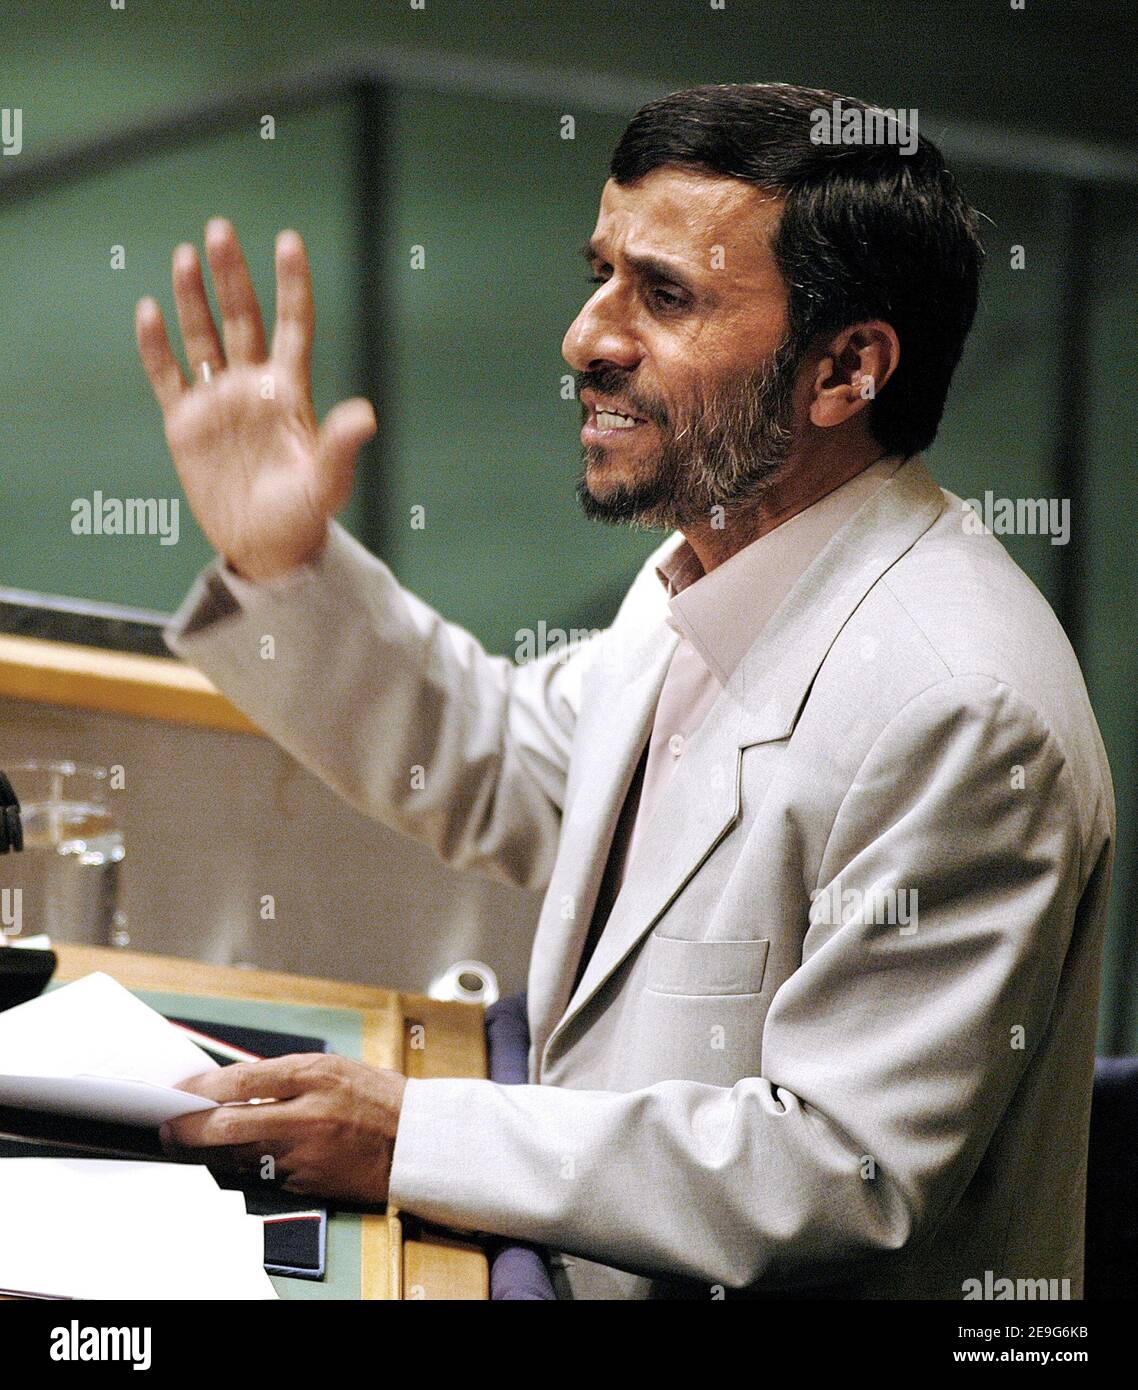 Iranian President Mahmoud Ahmadinejad addresses the 61st United Nations General Assembly session at the UN headquarters in New York City, NY, USA, on September 19, 2006. Ahmadinejad launched a scathing attack on the United States and Britain, accusing them of using the United Nations to dominate international affairs and prevent his country from having nuclear power. Photo by Olivier Douliery/ABACAPRESS.COM Stock Photo